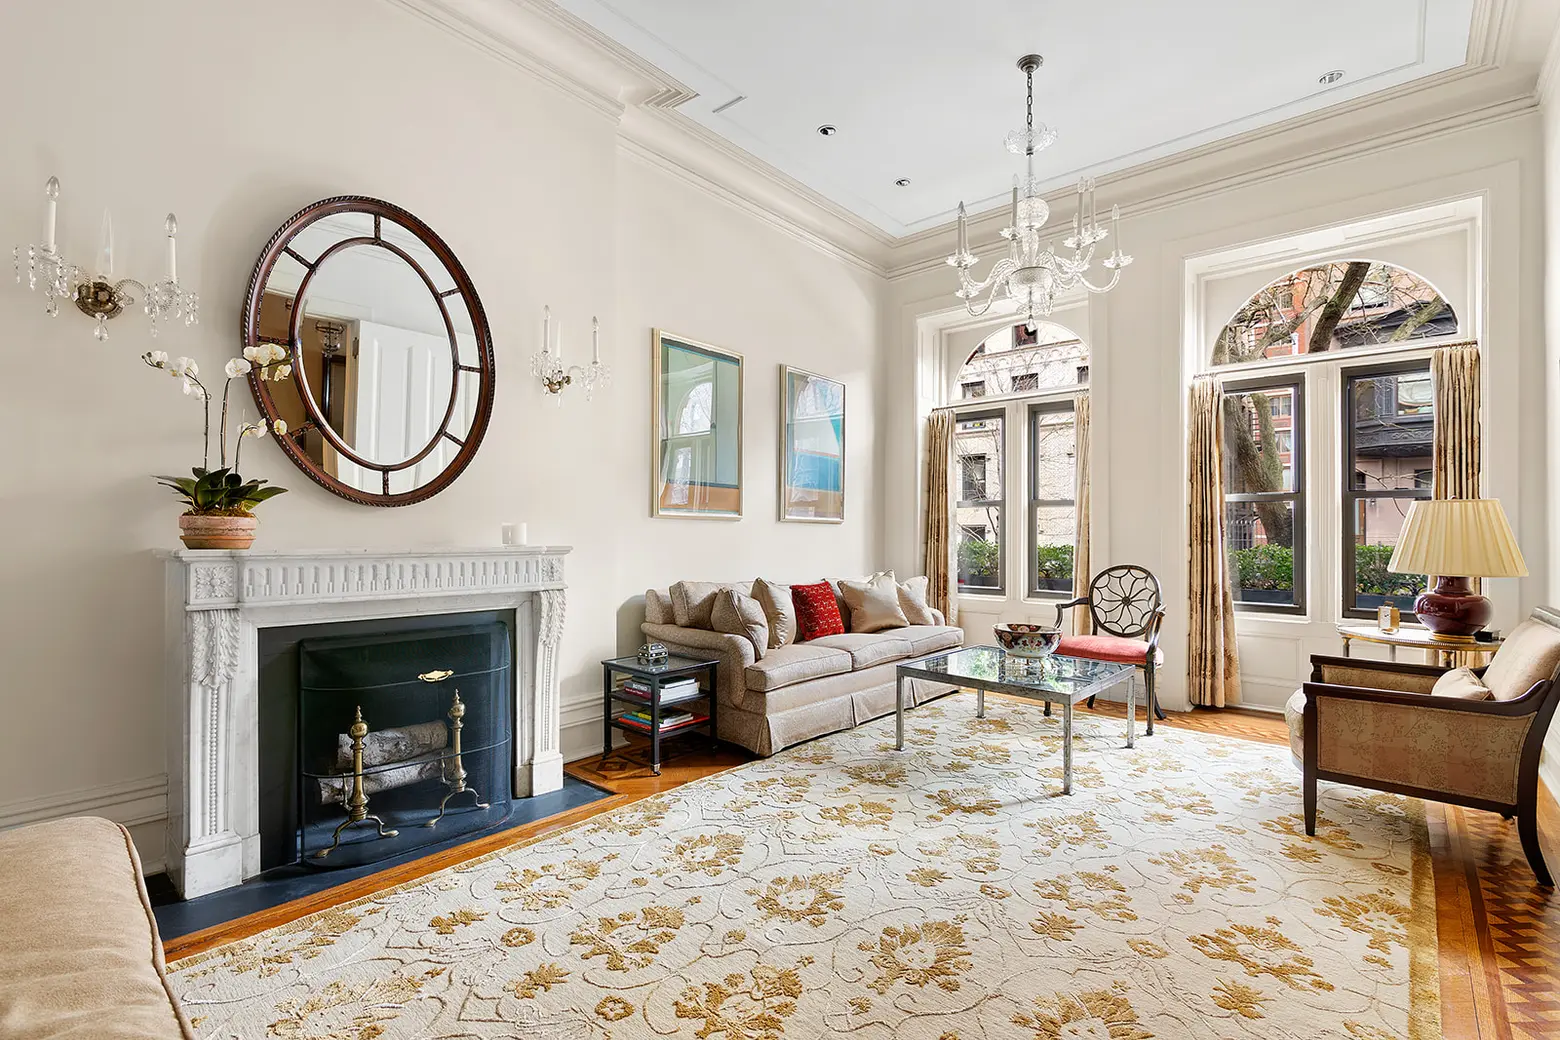 $7.5M Upper East Side townhouse was once home to abstract painter Mark Rothko